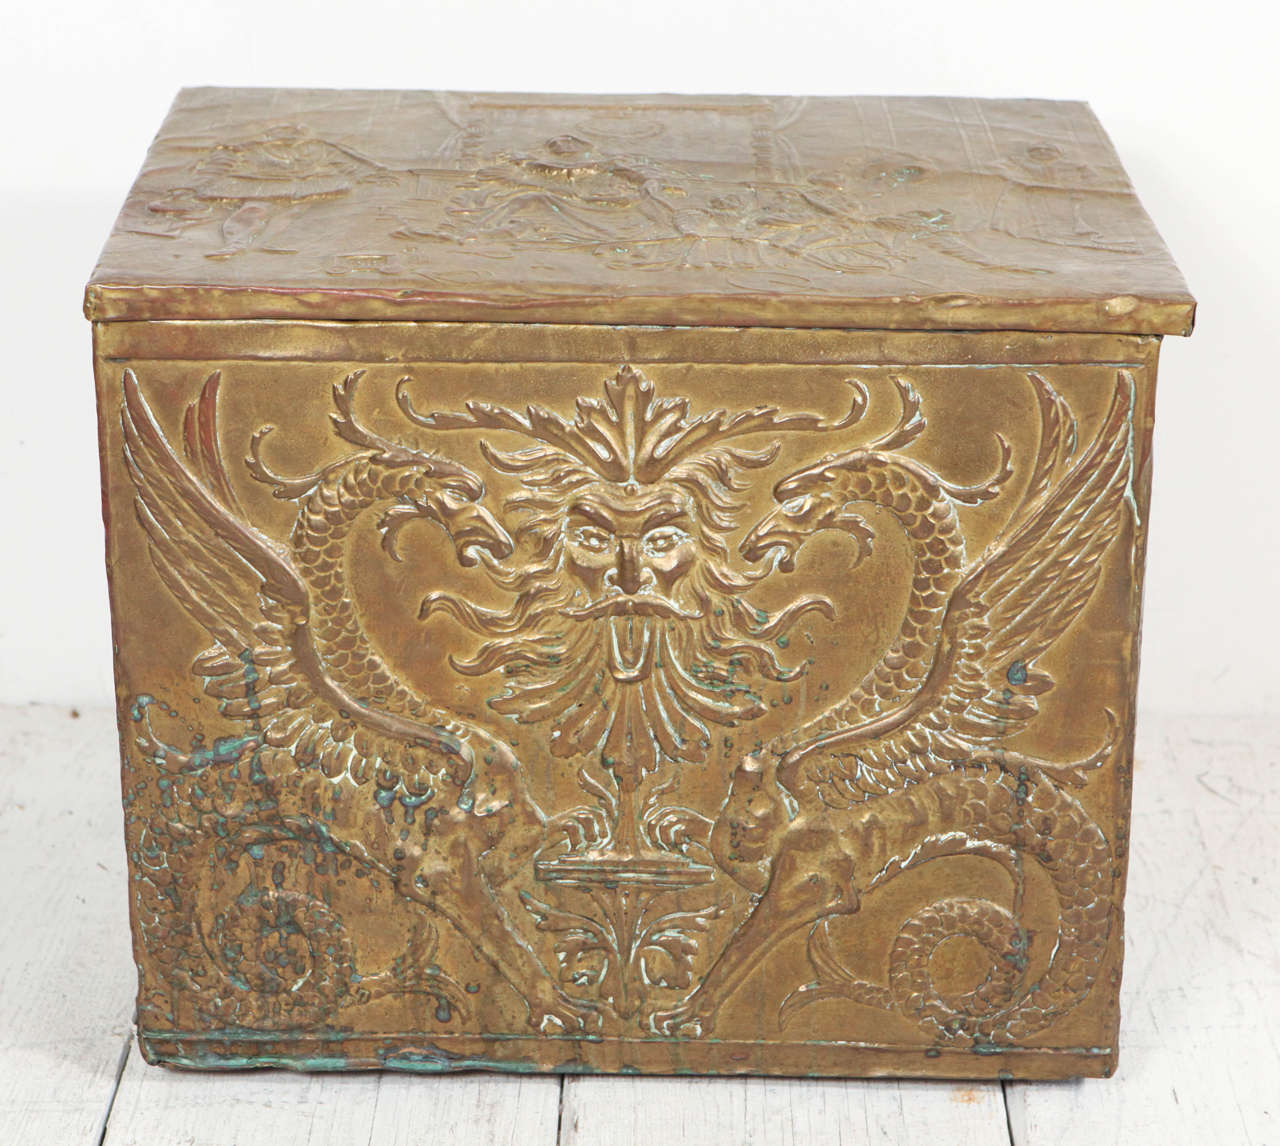 One-of-a-kind hammered metal box with dragon and god theme.